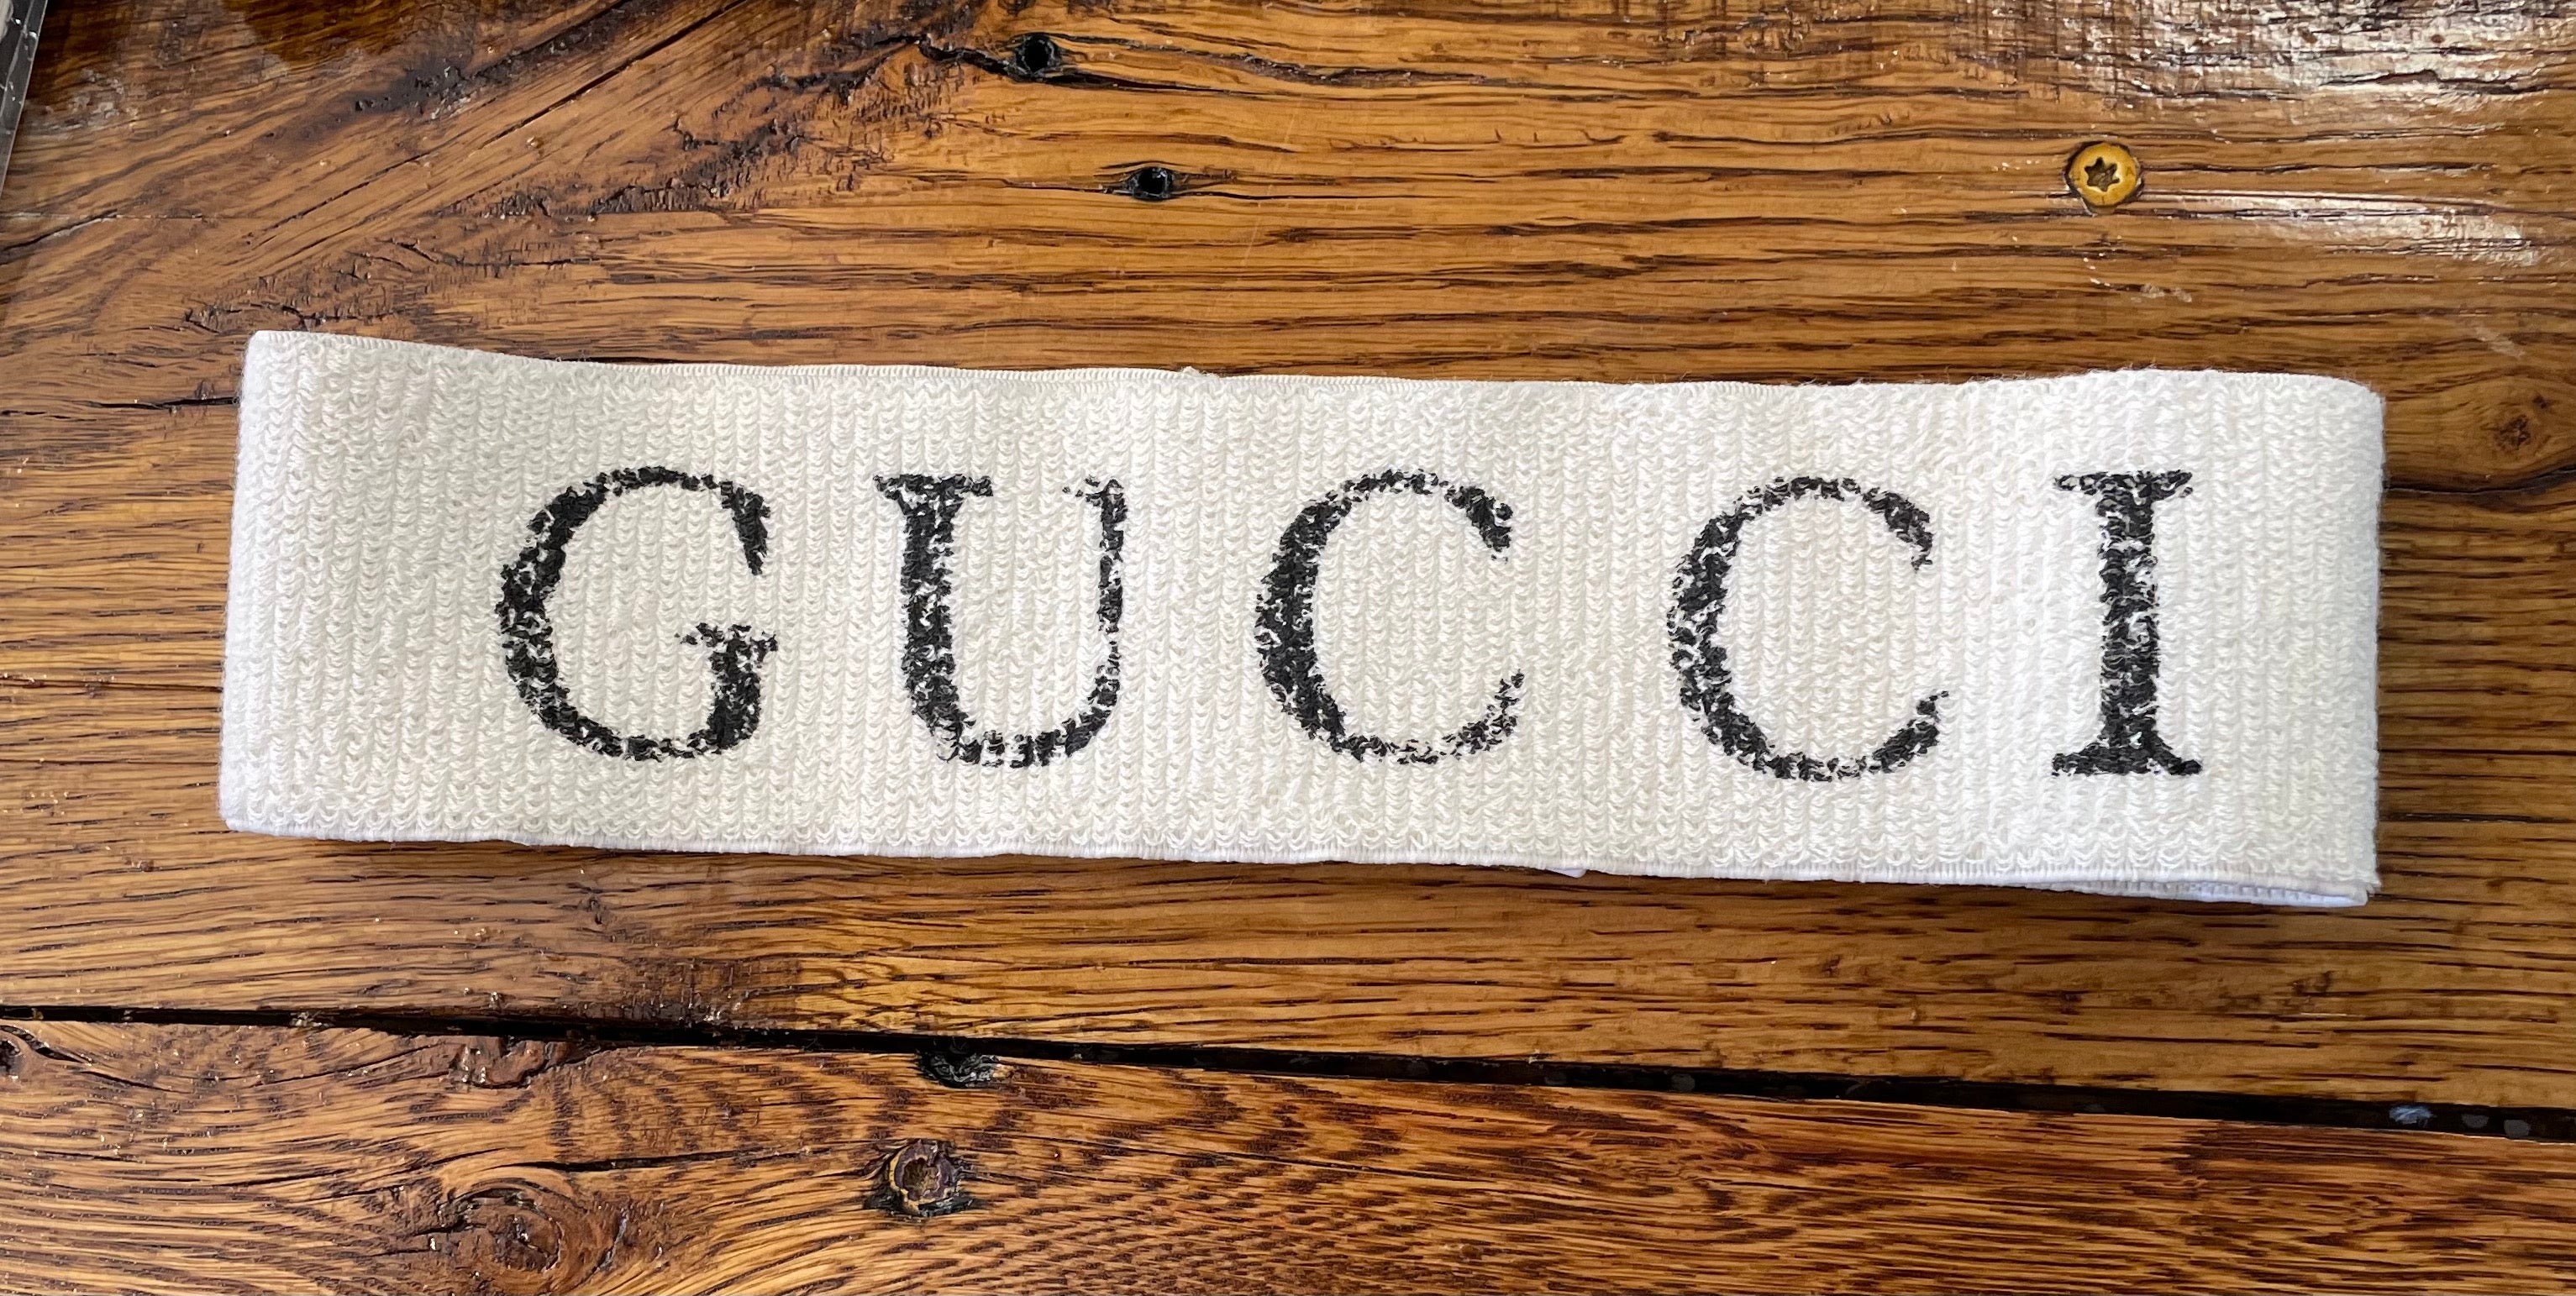 Gucci Dupe Hat Band